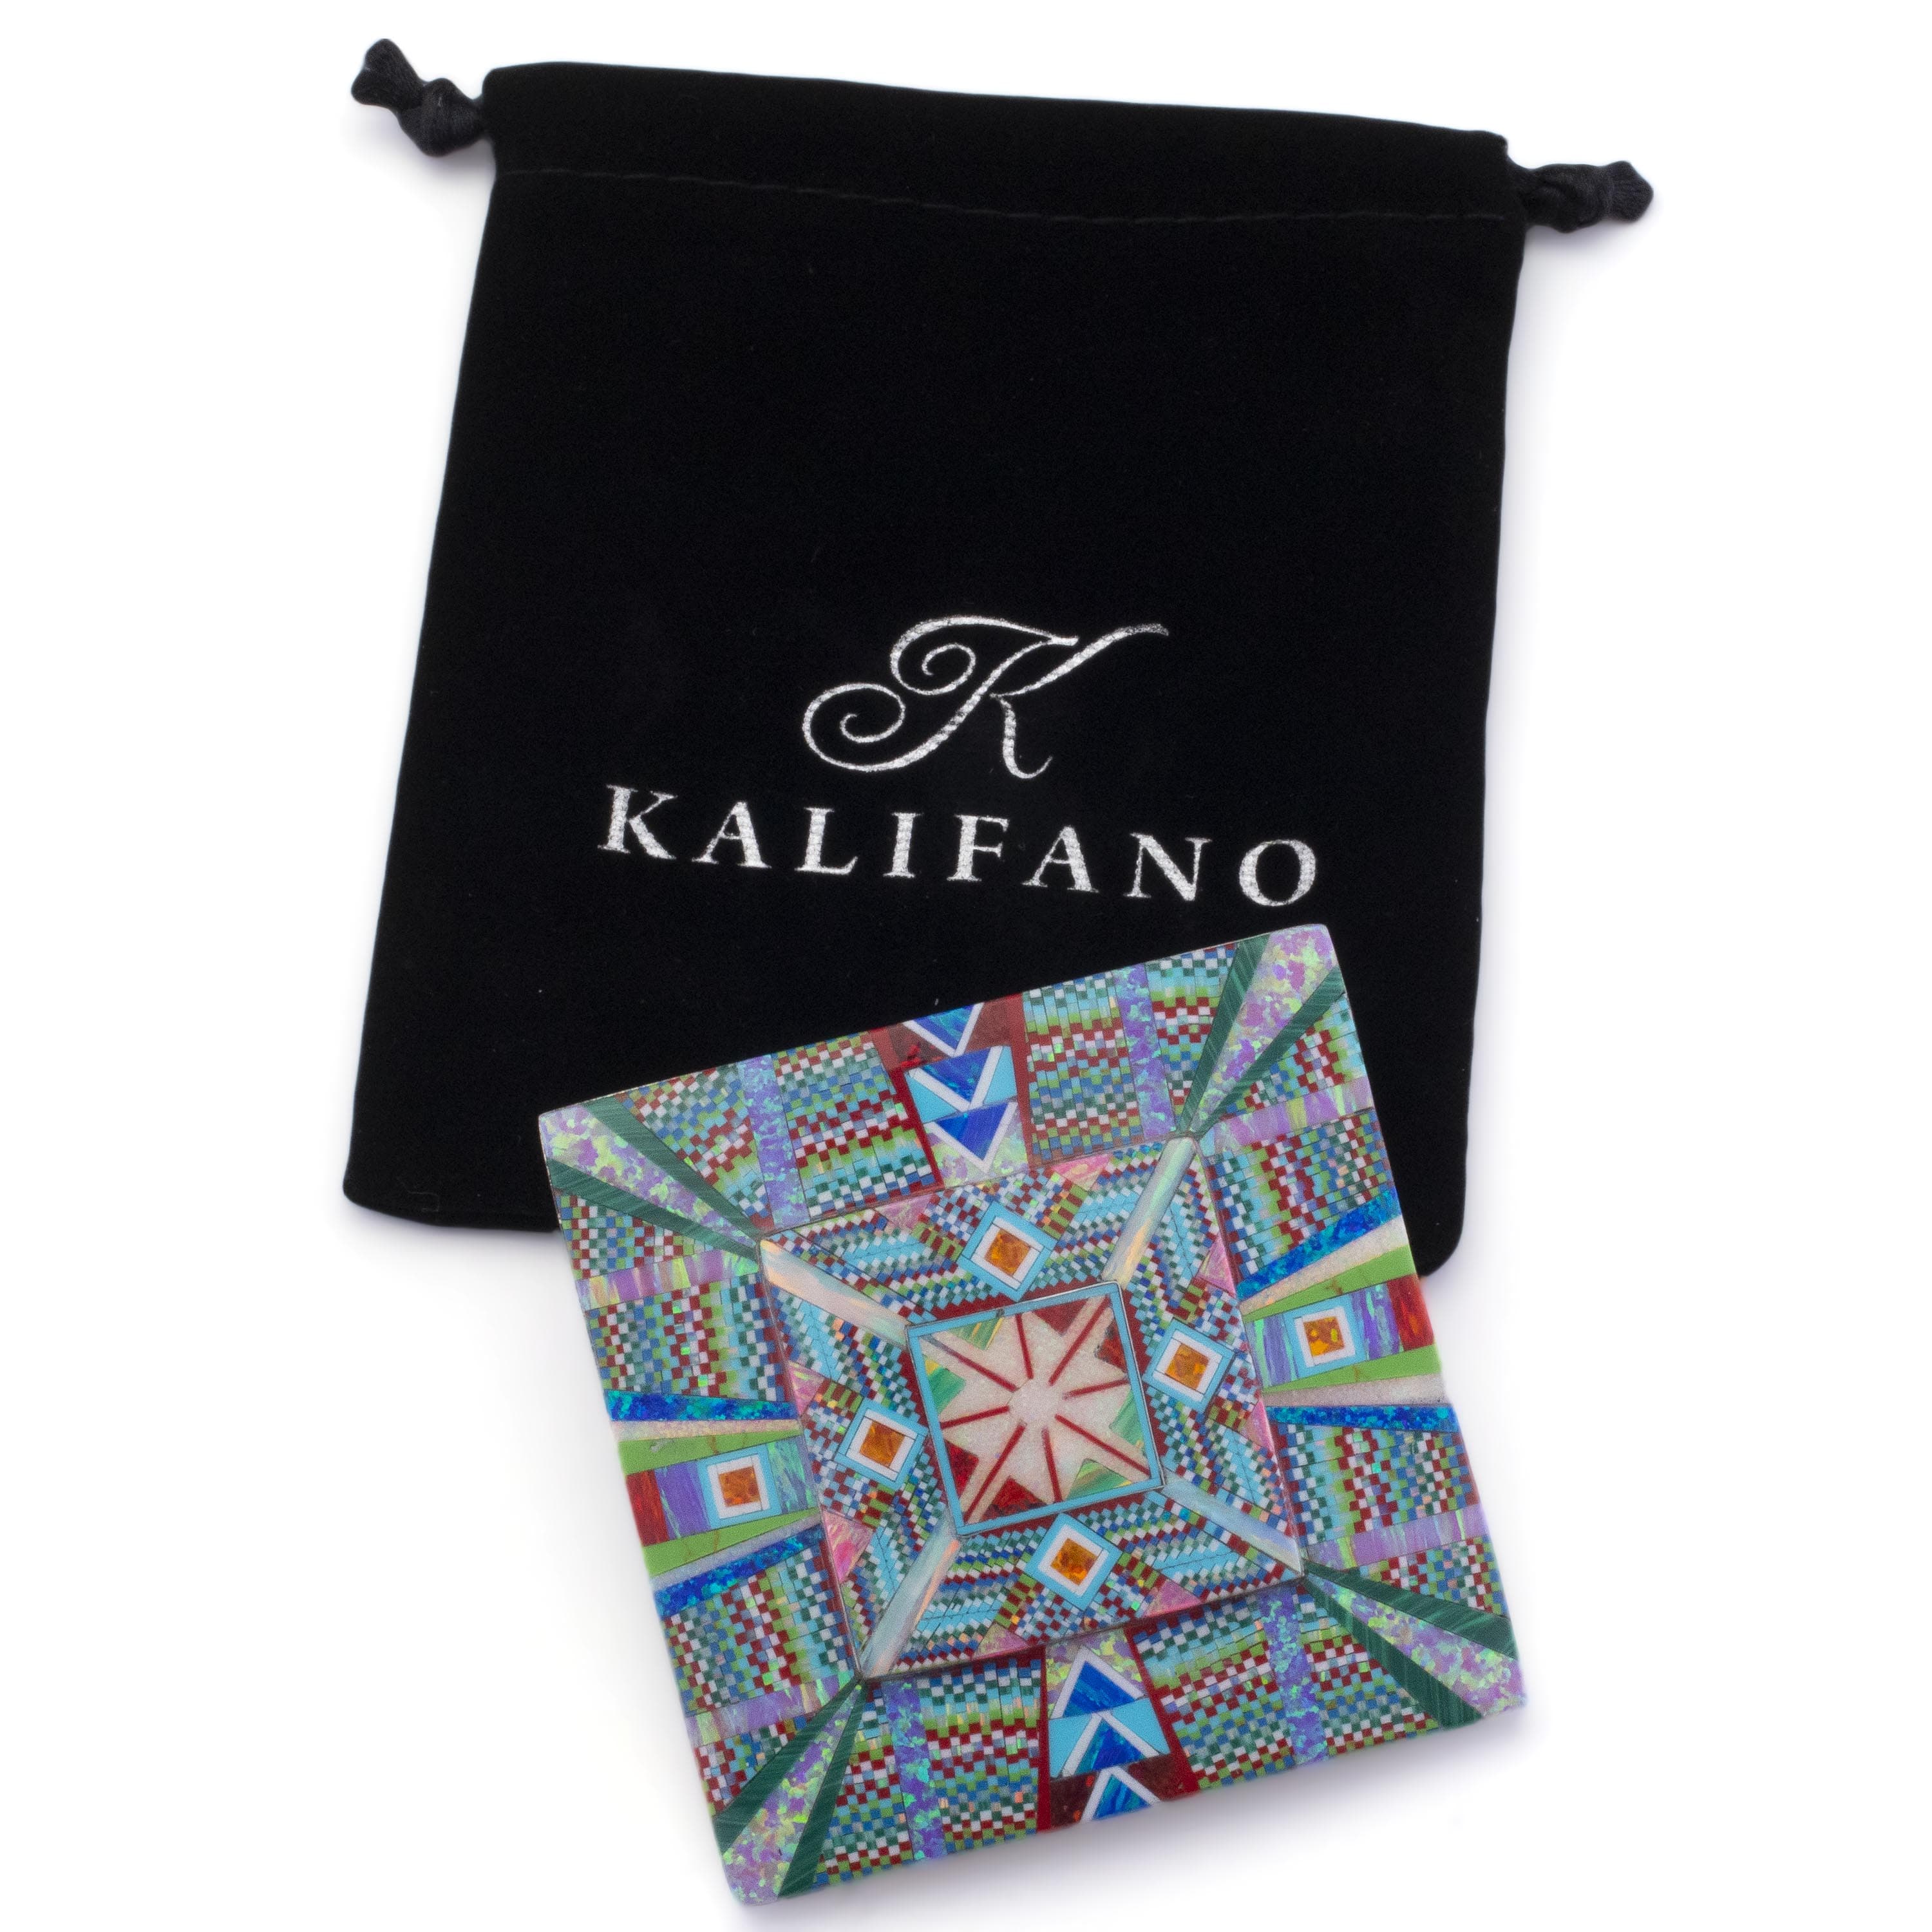 KALIFANO Southwest Silver Jewelry Multi Gem Opal Micro Inlay with Genuine Turquoise and Coral Handmade 925 Sterling Silver Square Belt Buckle AKBB1800.002